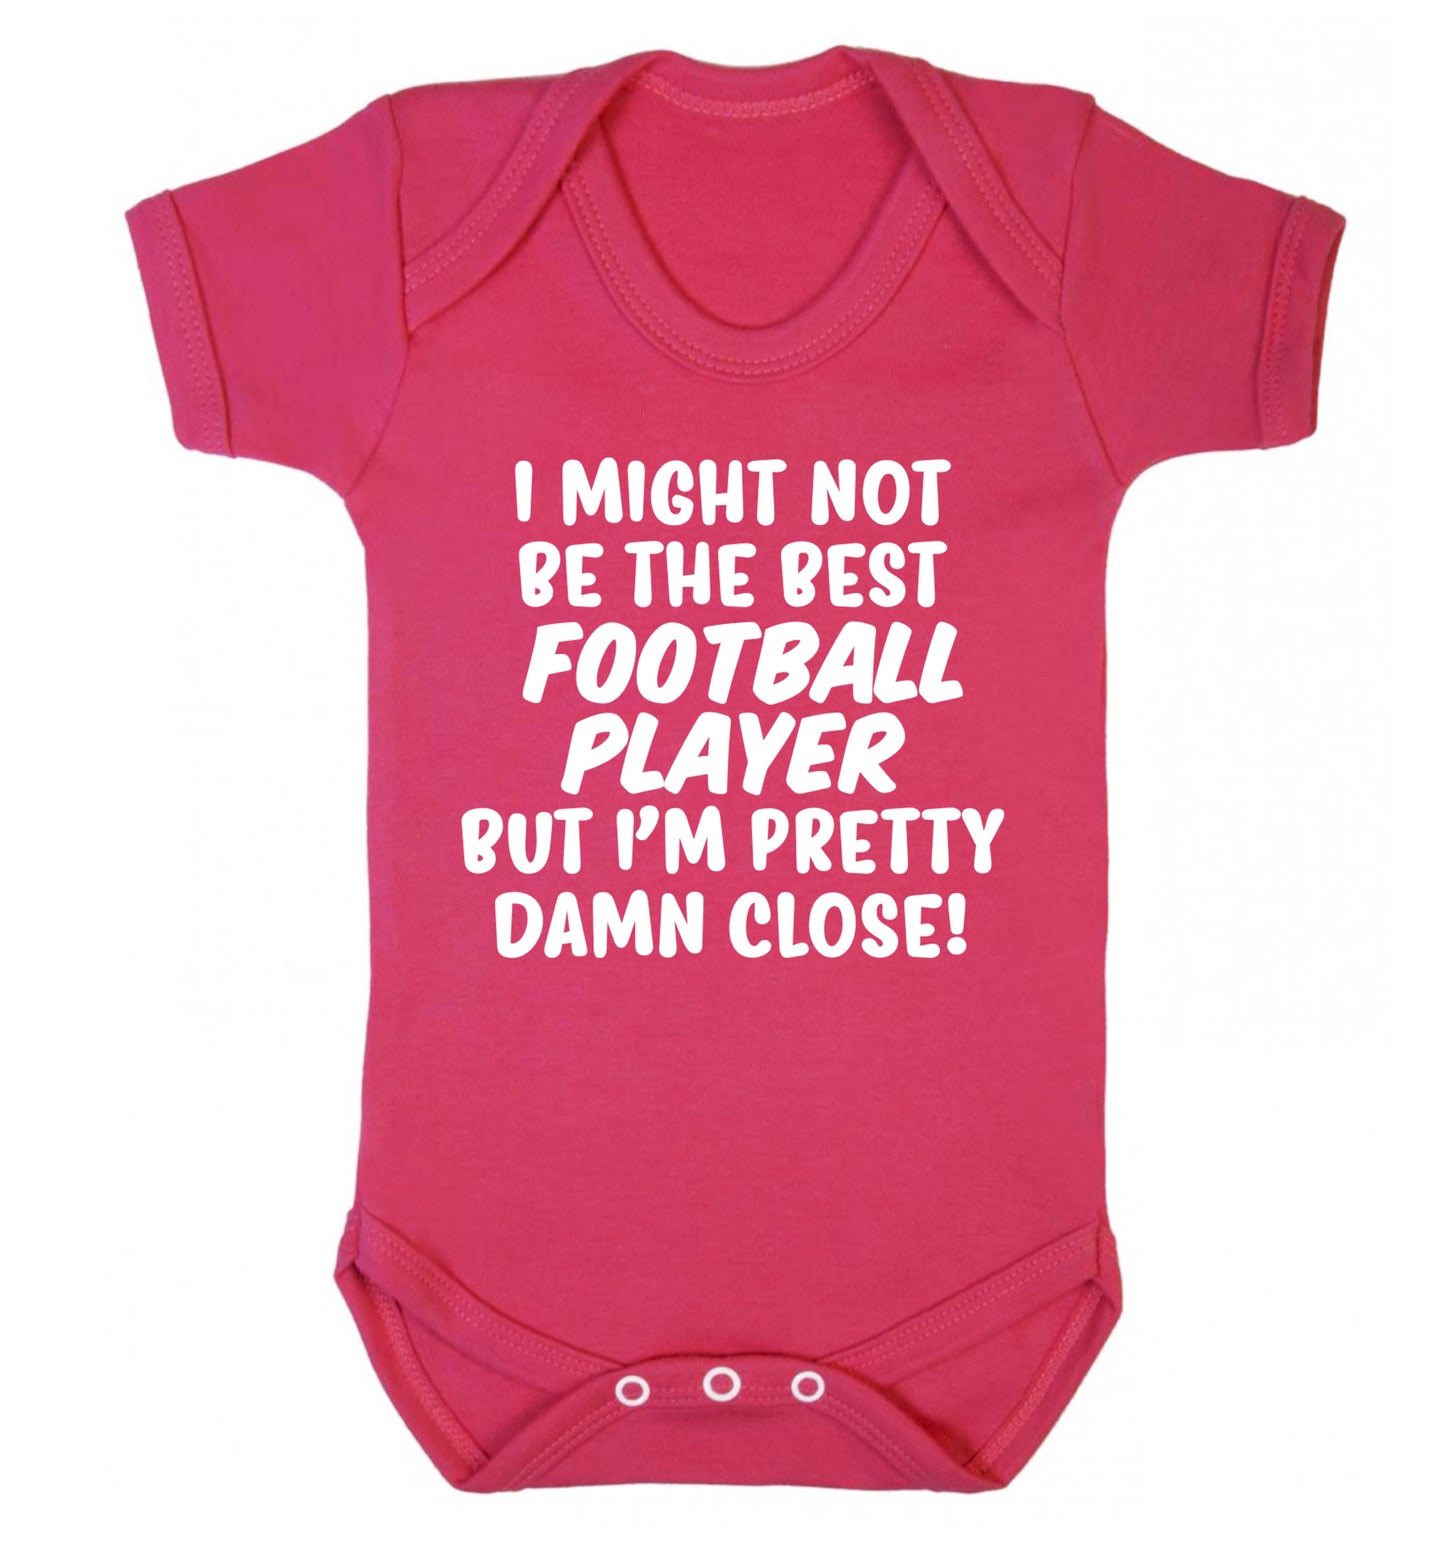 I might not be the best football player but I'm pretty close! Baby Vest dark pink 18-24 months